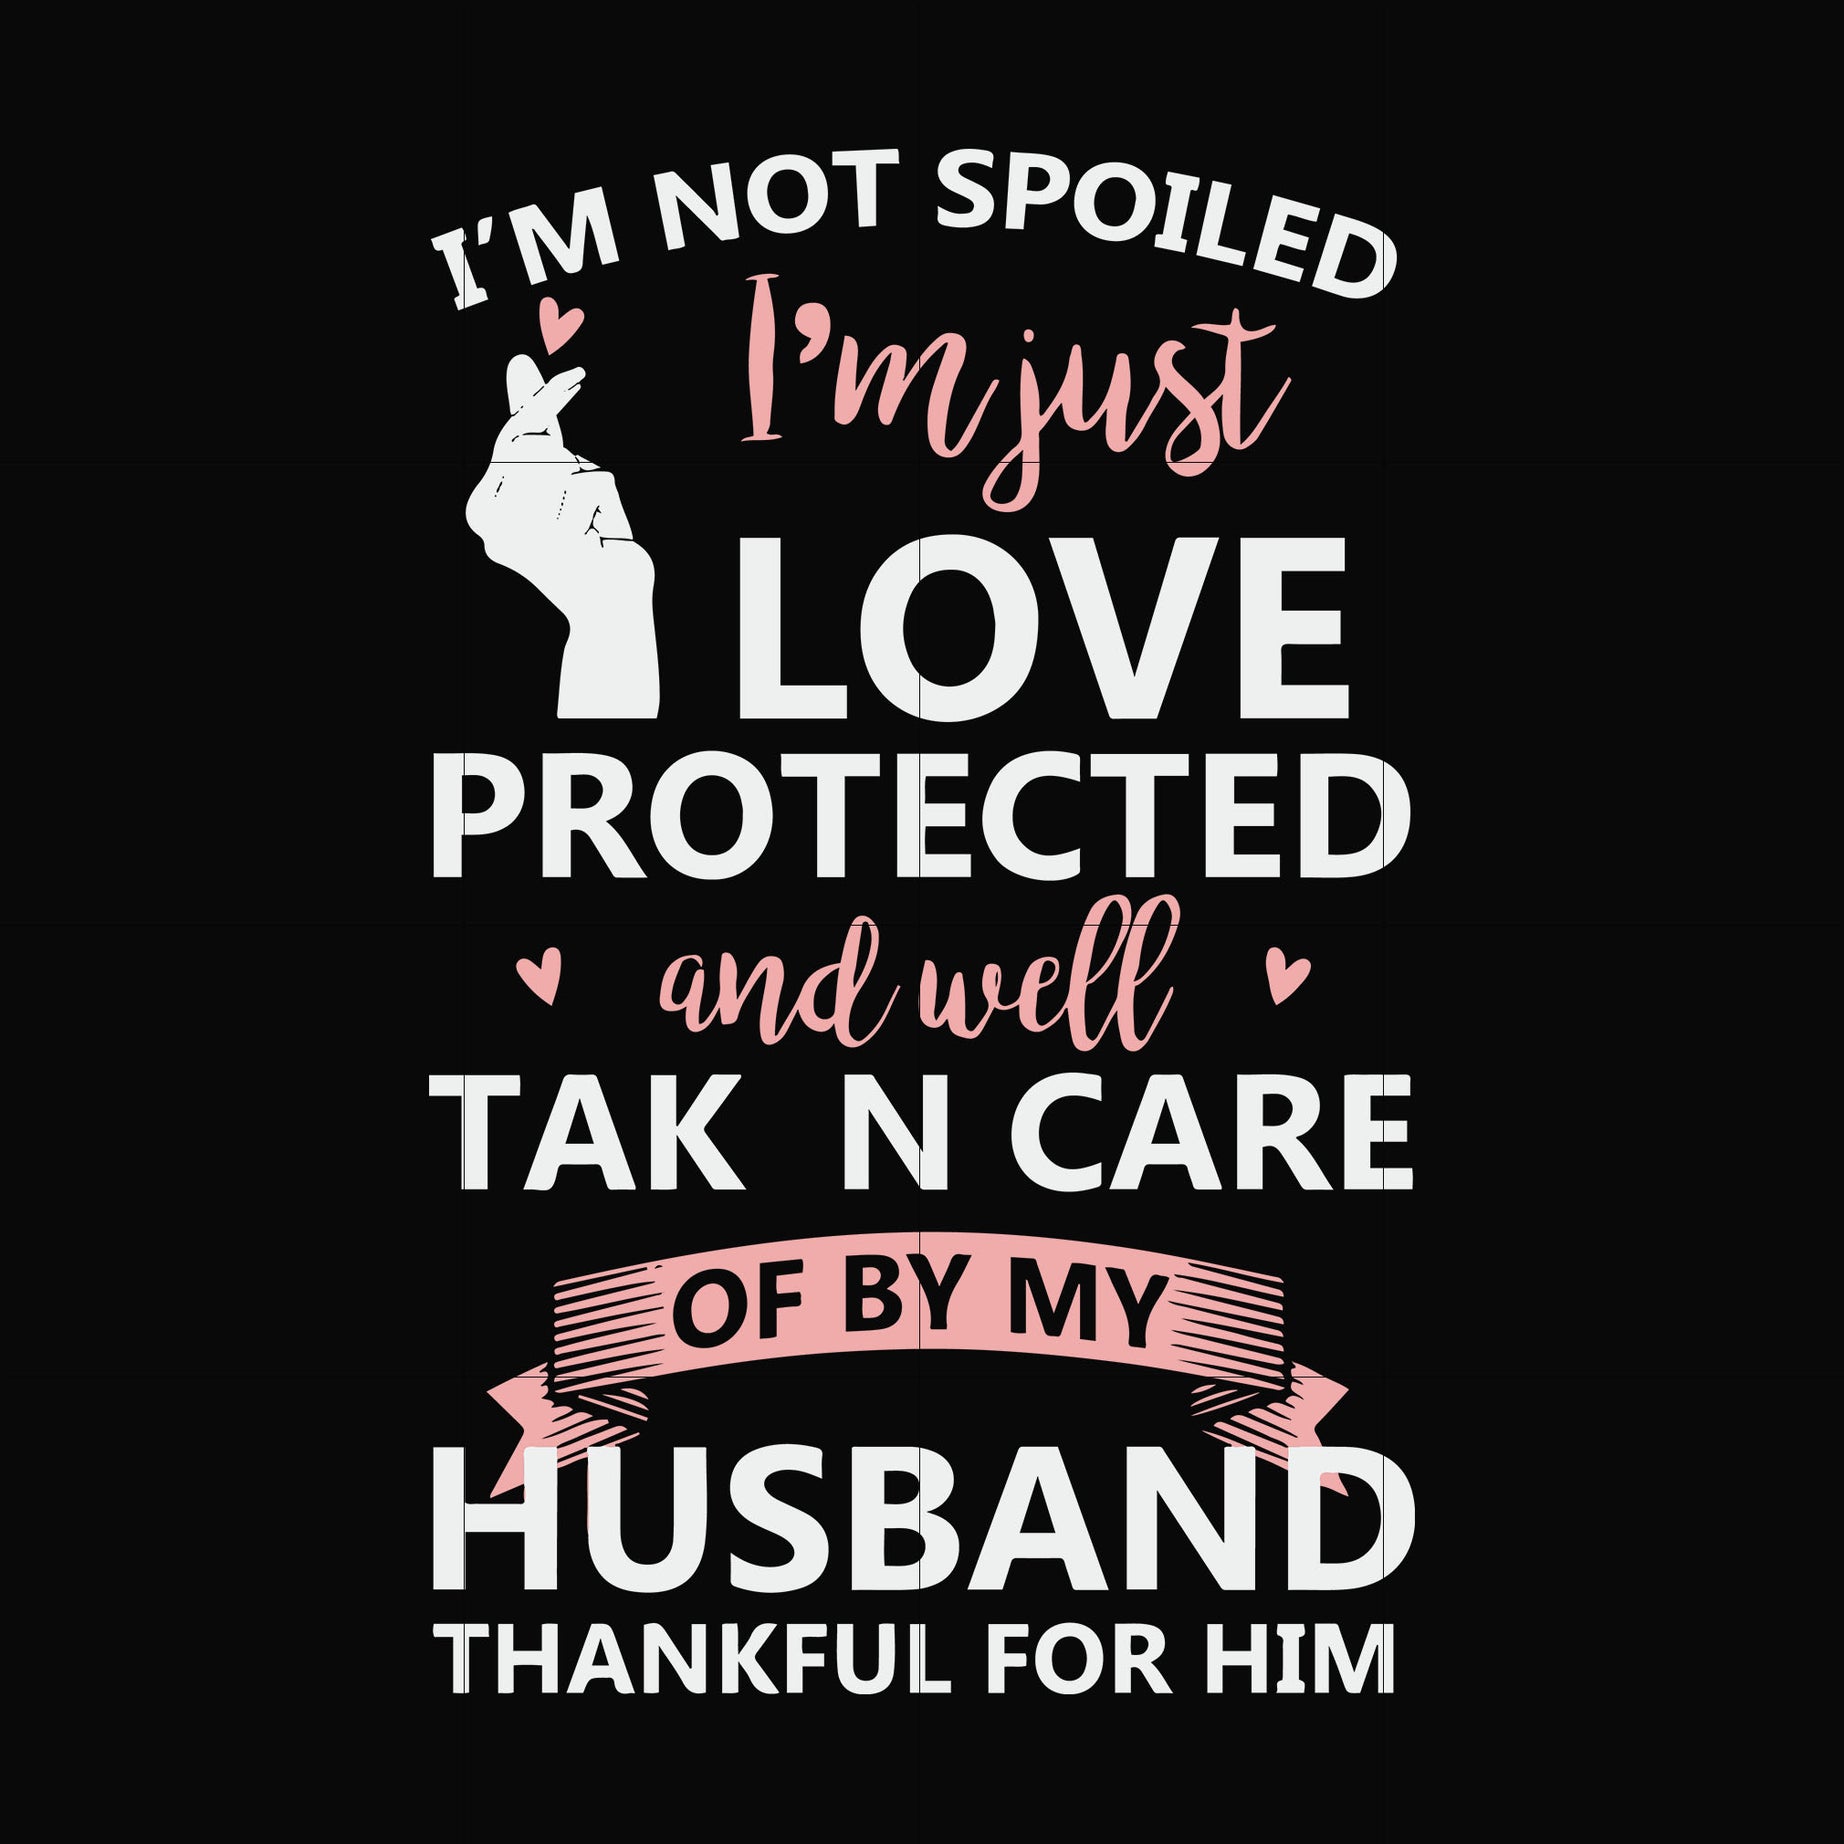 I'm not spoiled I'm just loved protected and well taken care of by my husband thankful for him svg, png, dxf, eps file FN000795